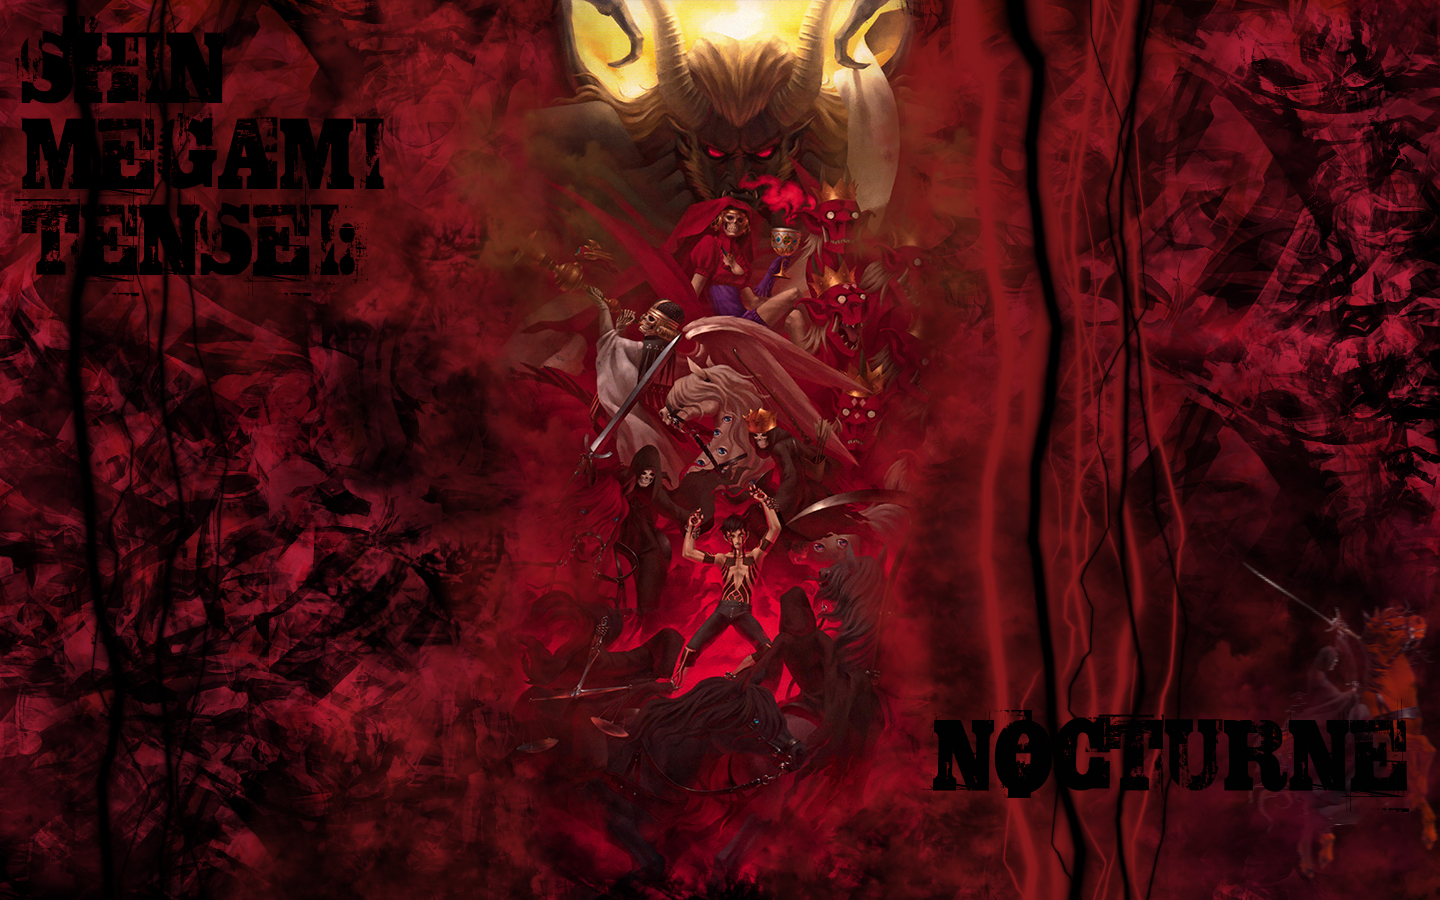 Displaying 13 Images For   Shin Megami Tensei Nocturne Wallpaper